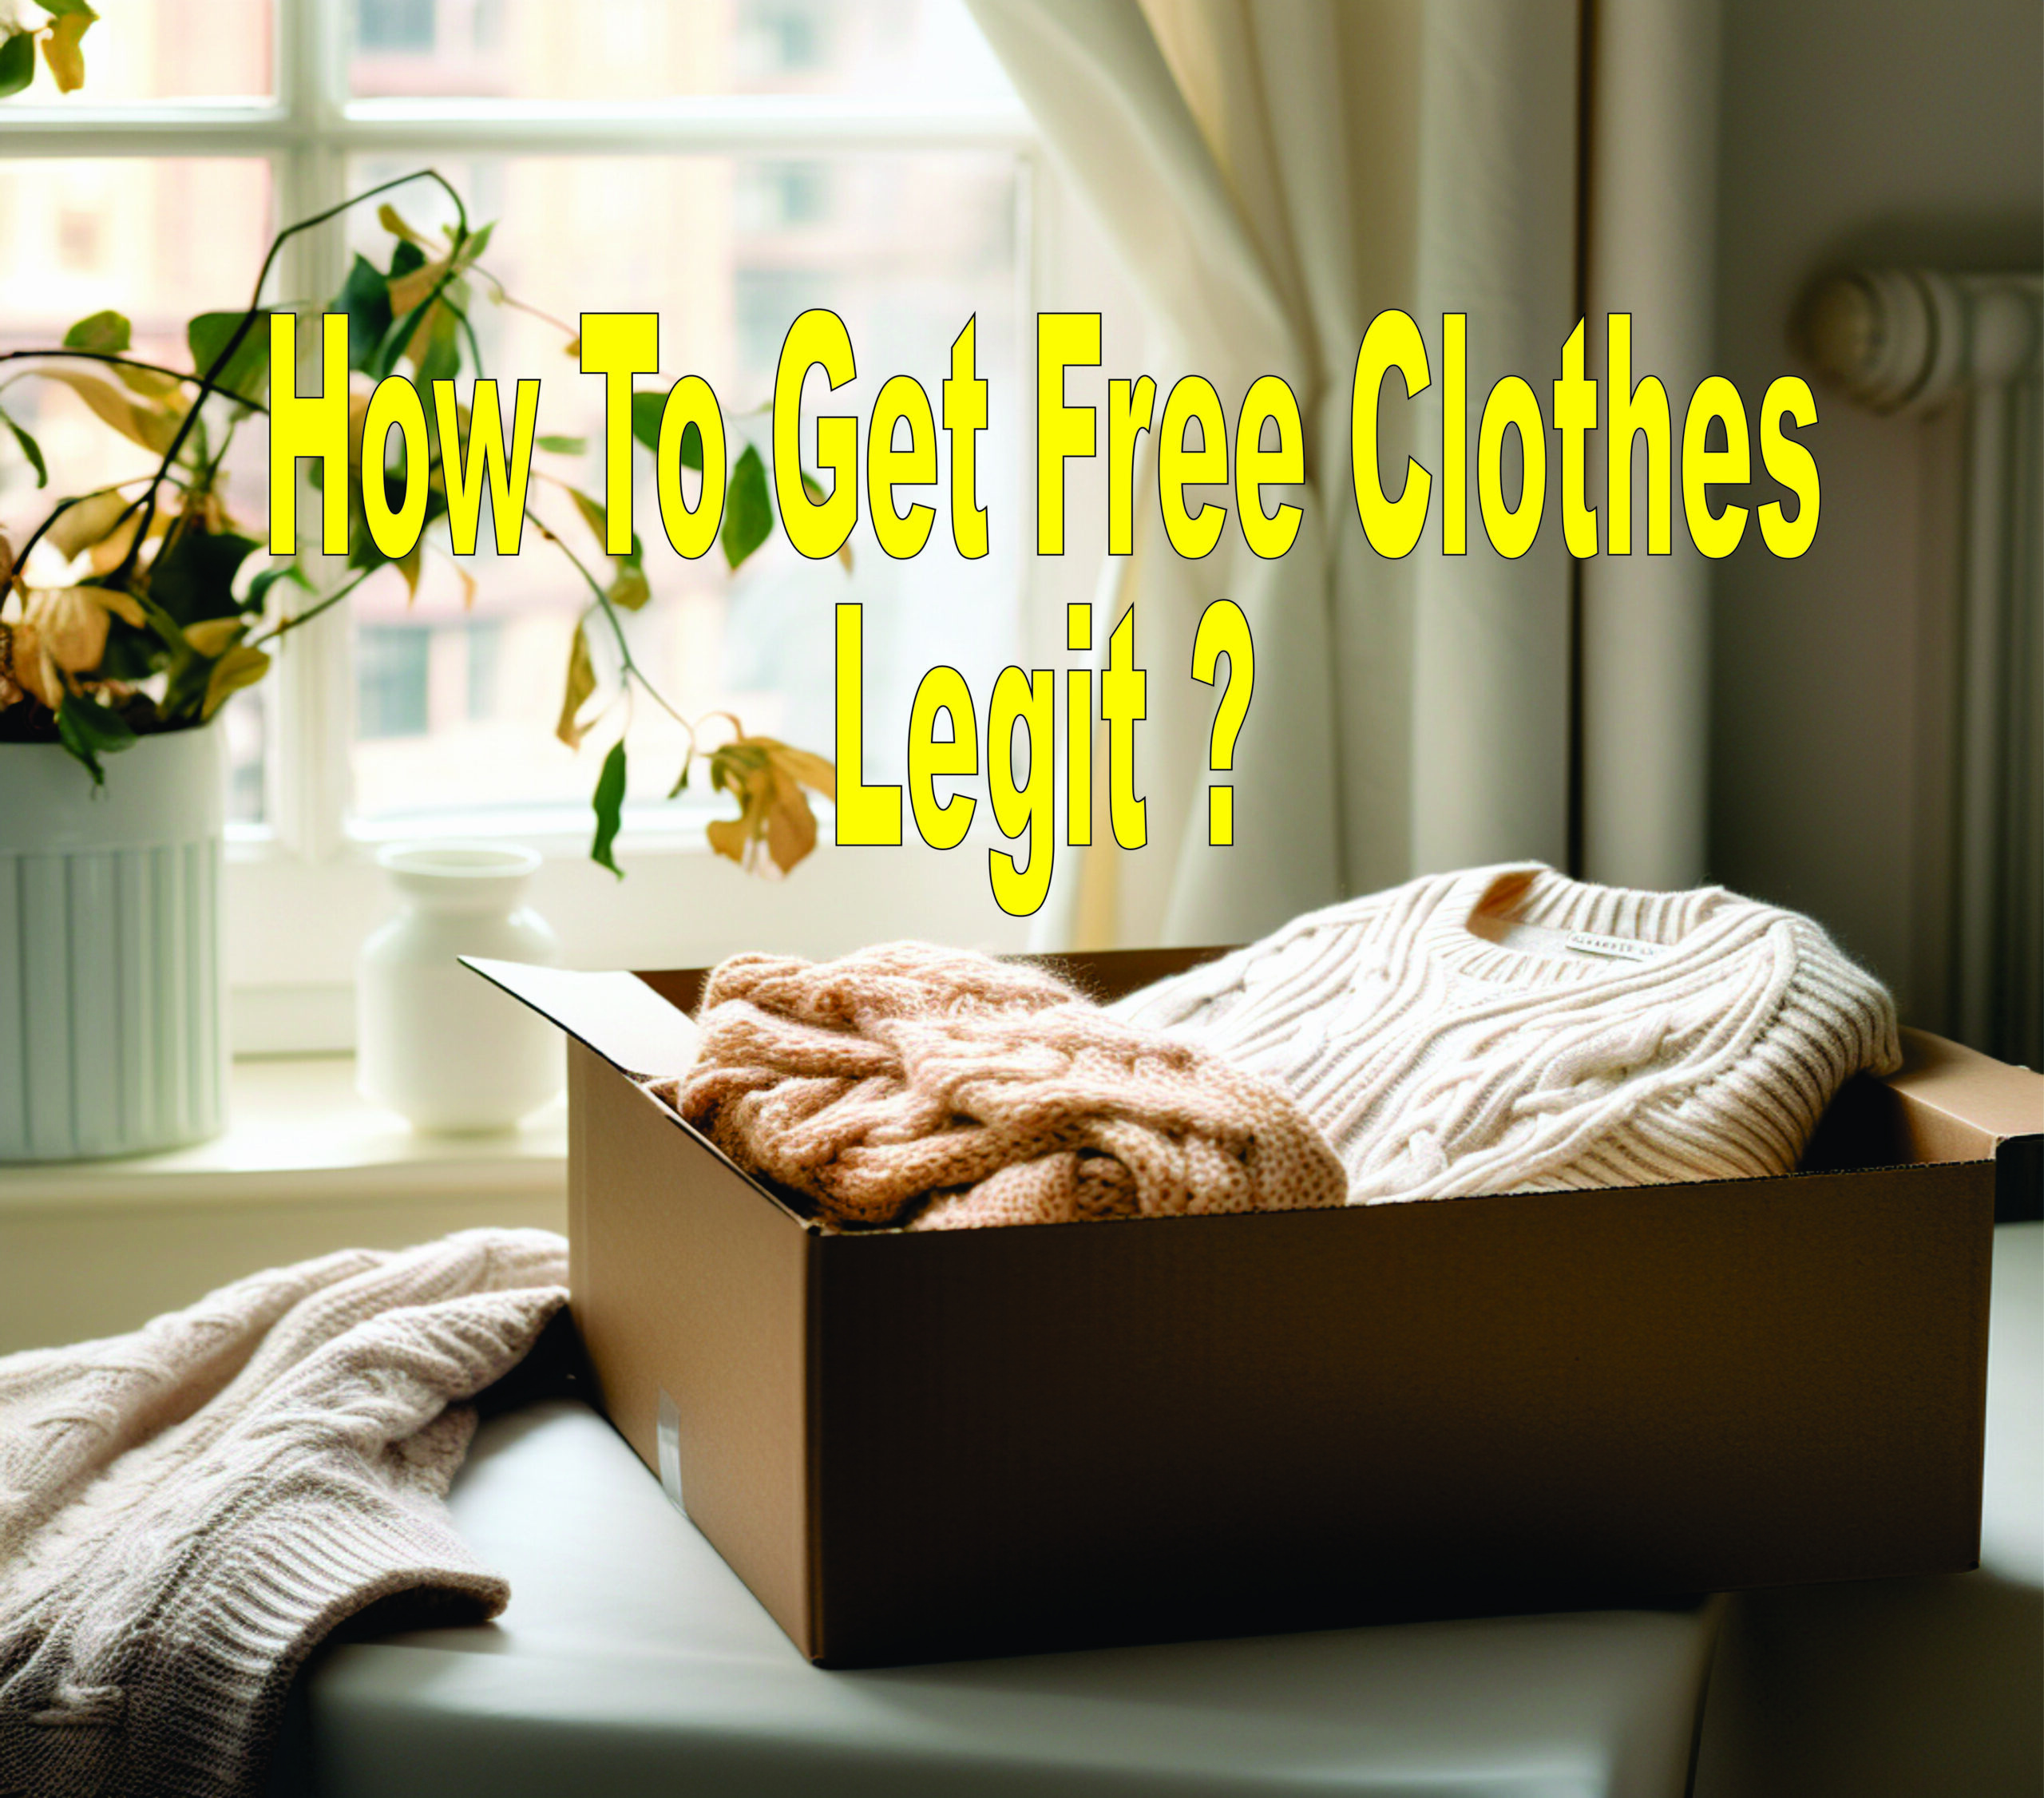 How To Get Free Clothes Legit